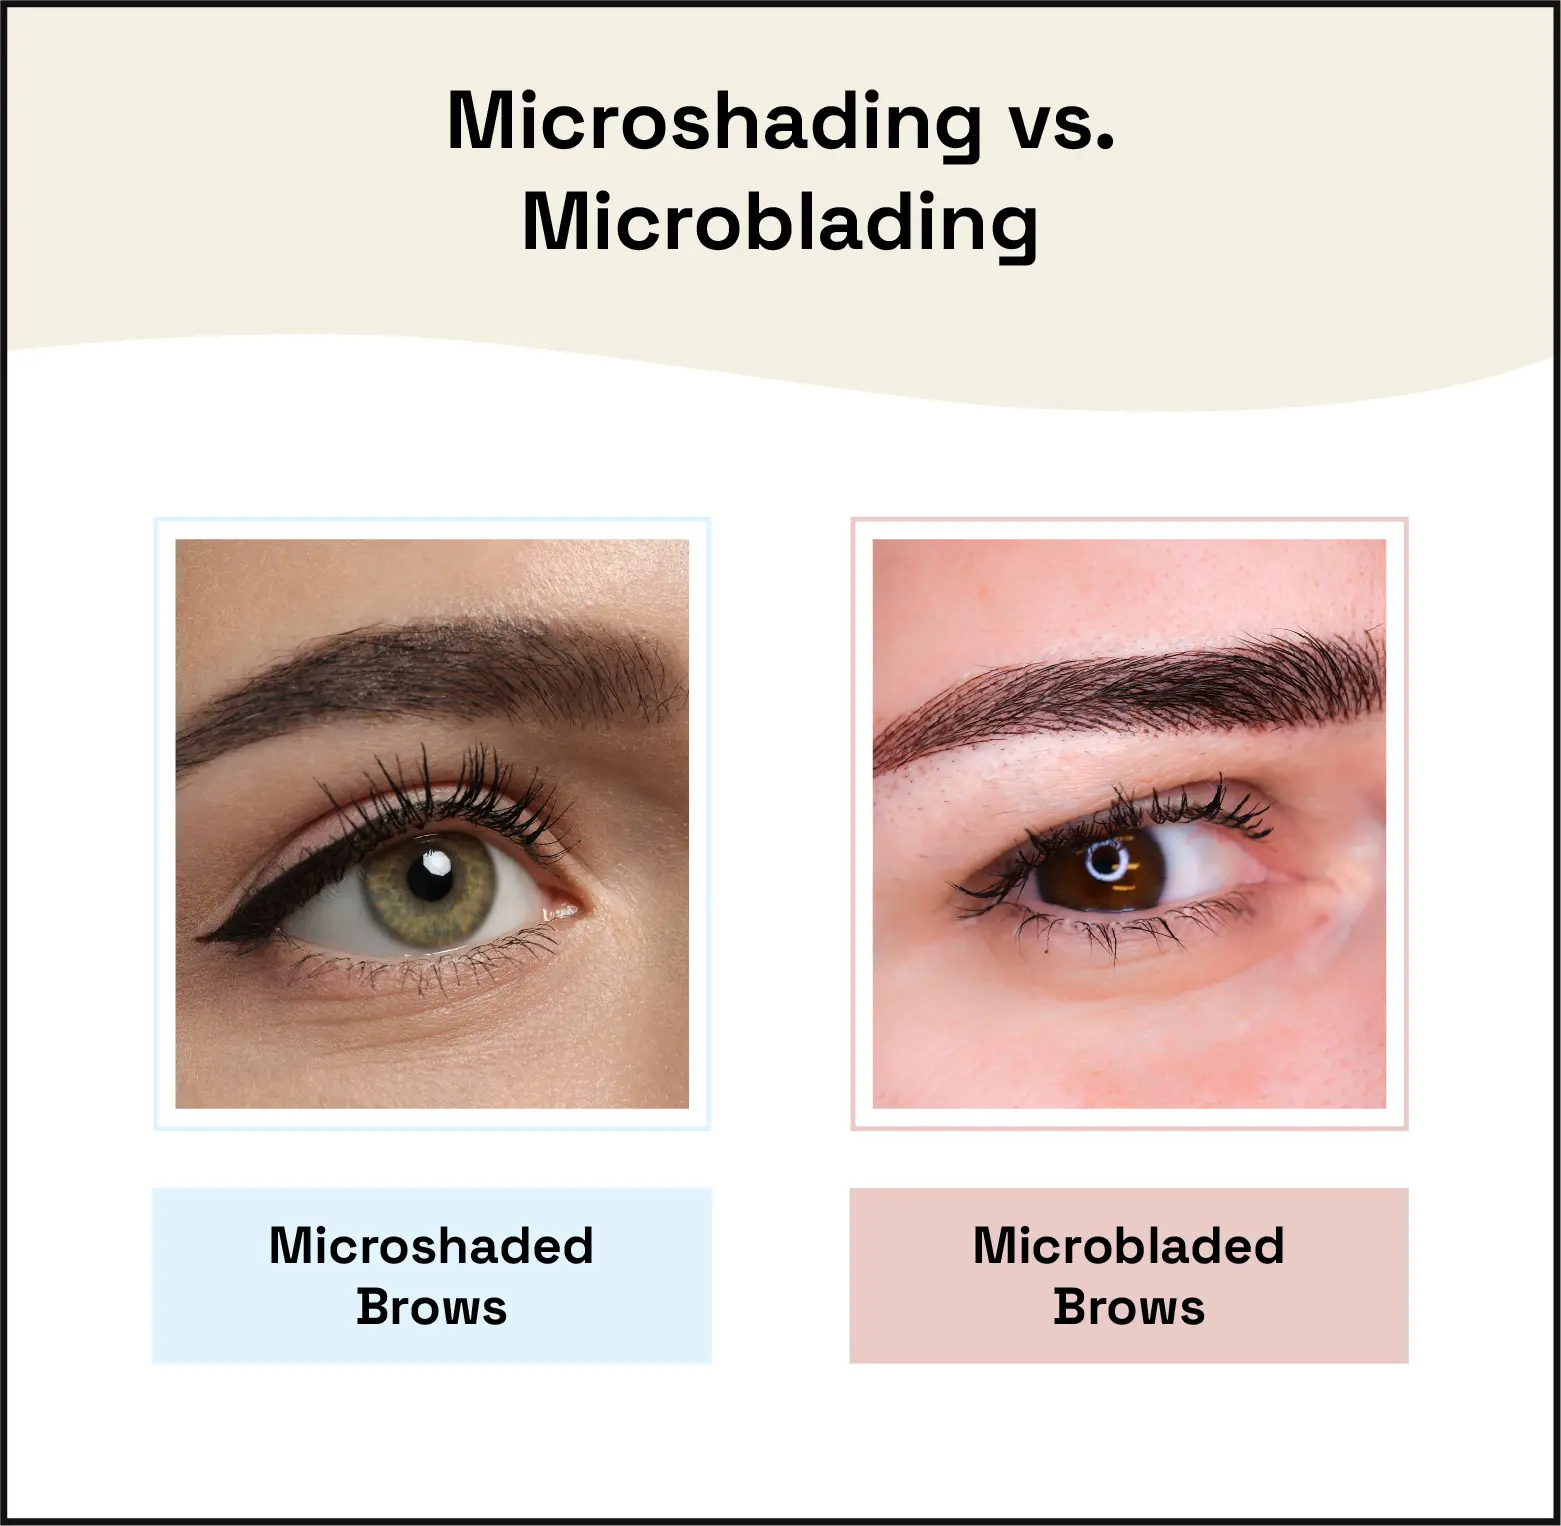 Two side-by-side images comparing the look of microshaded vs. microbladed brows.